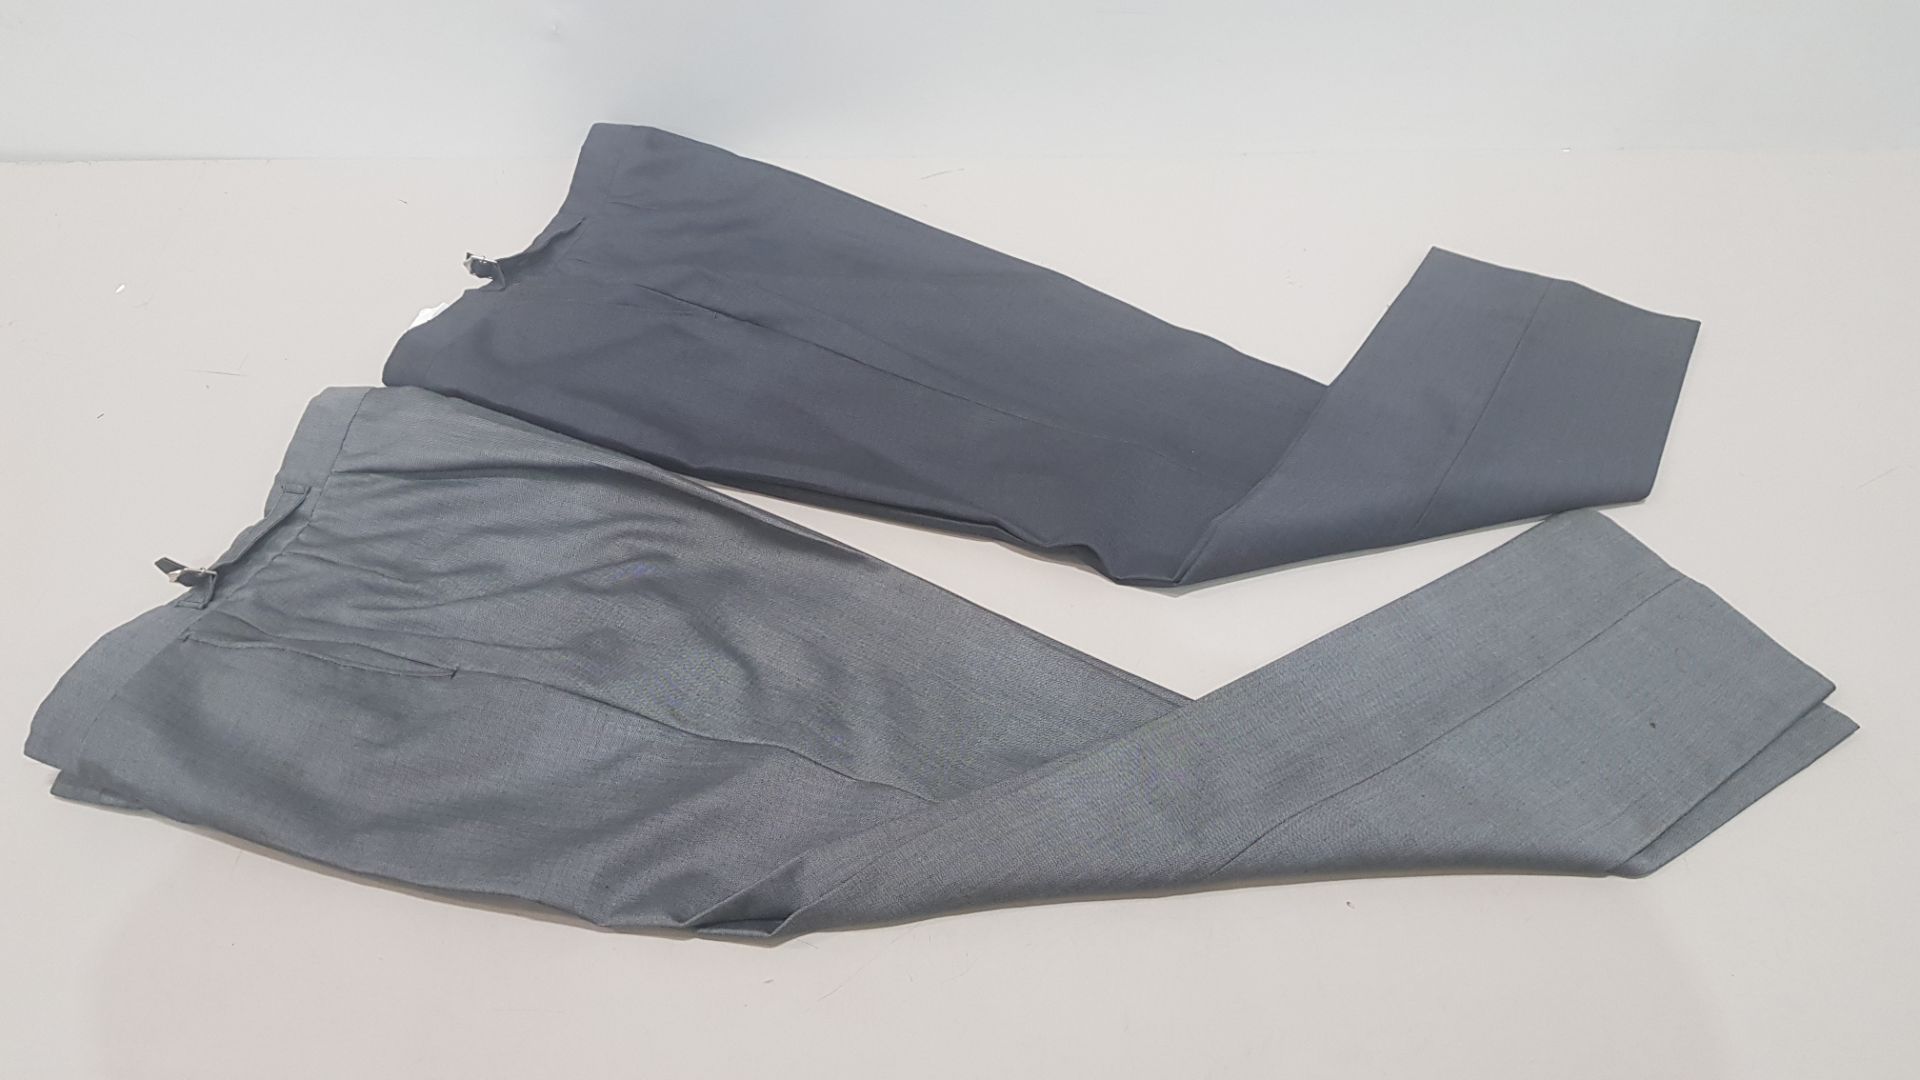 20 X EX HIRE TORRE SUIT PANTS IN SILVER AND CHARCOAL IN VARIOUS SIZES I.E - 34R-48R- 42L- ETC